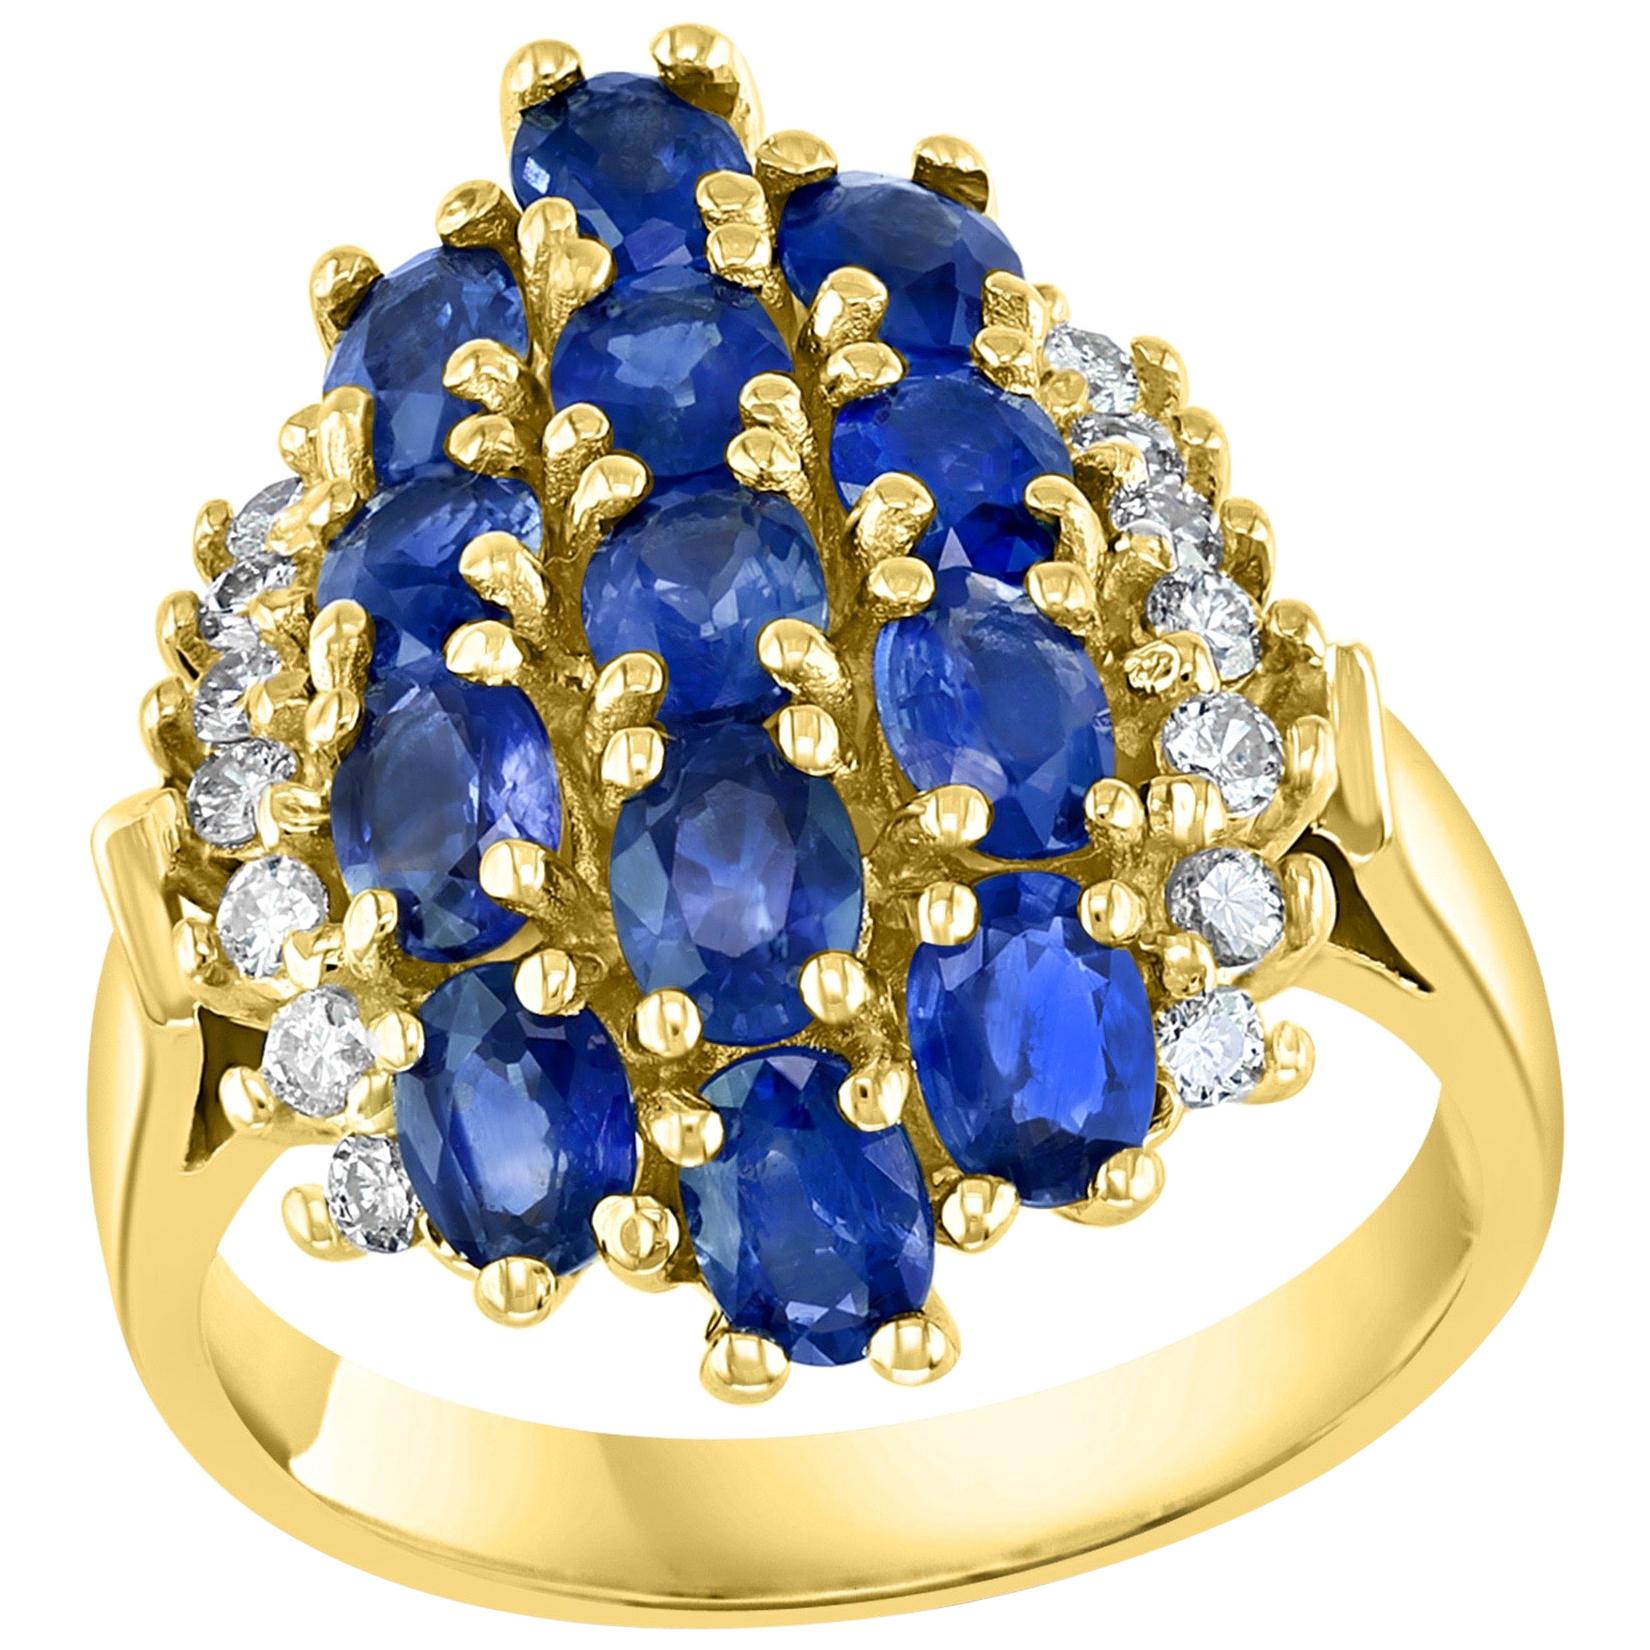 2 Carat Oval Blue Sapphire and Diamond Cocktail Ring in 14 Karat Gold Estate